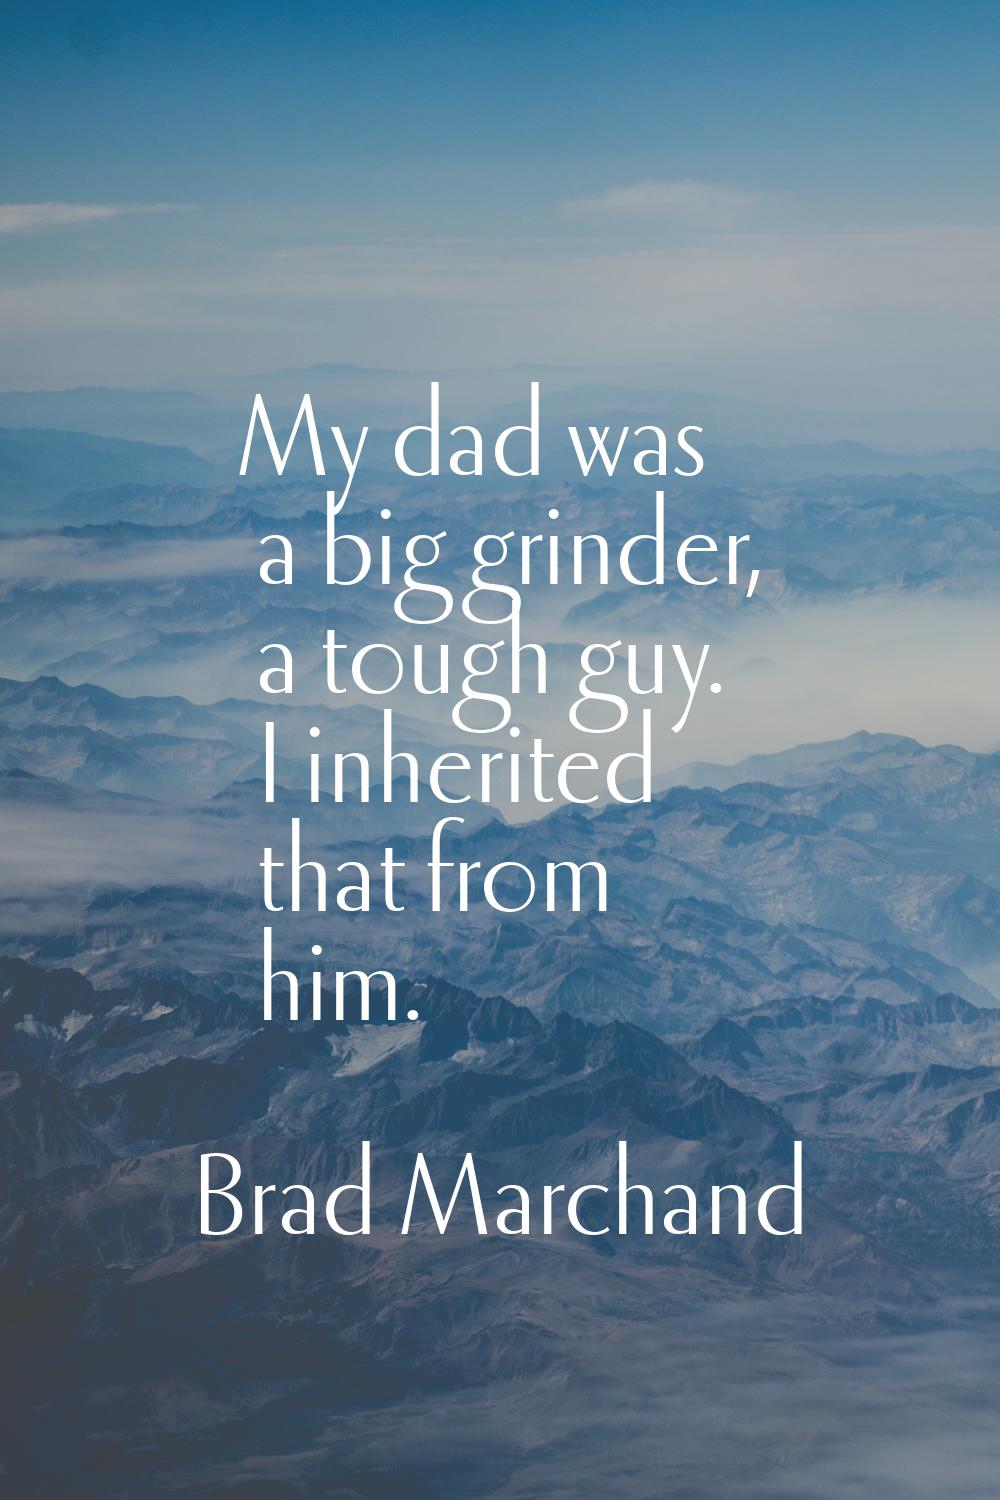 My dad was a big grinder, a tough guy. I inherited that from him.